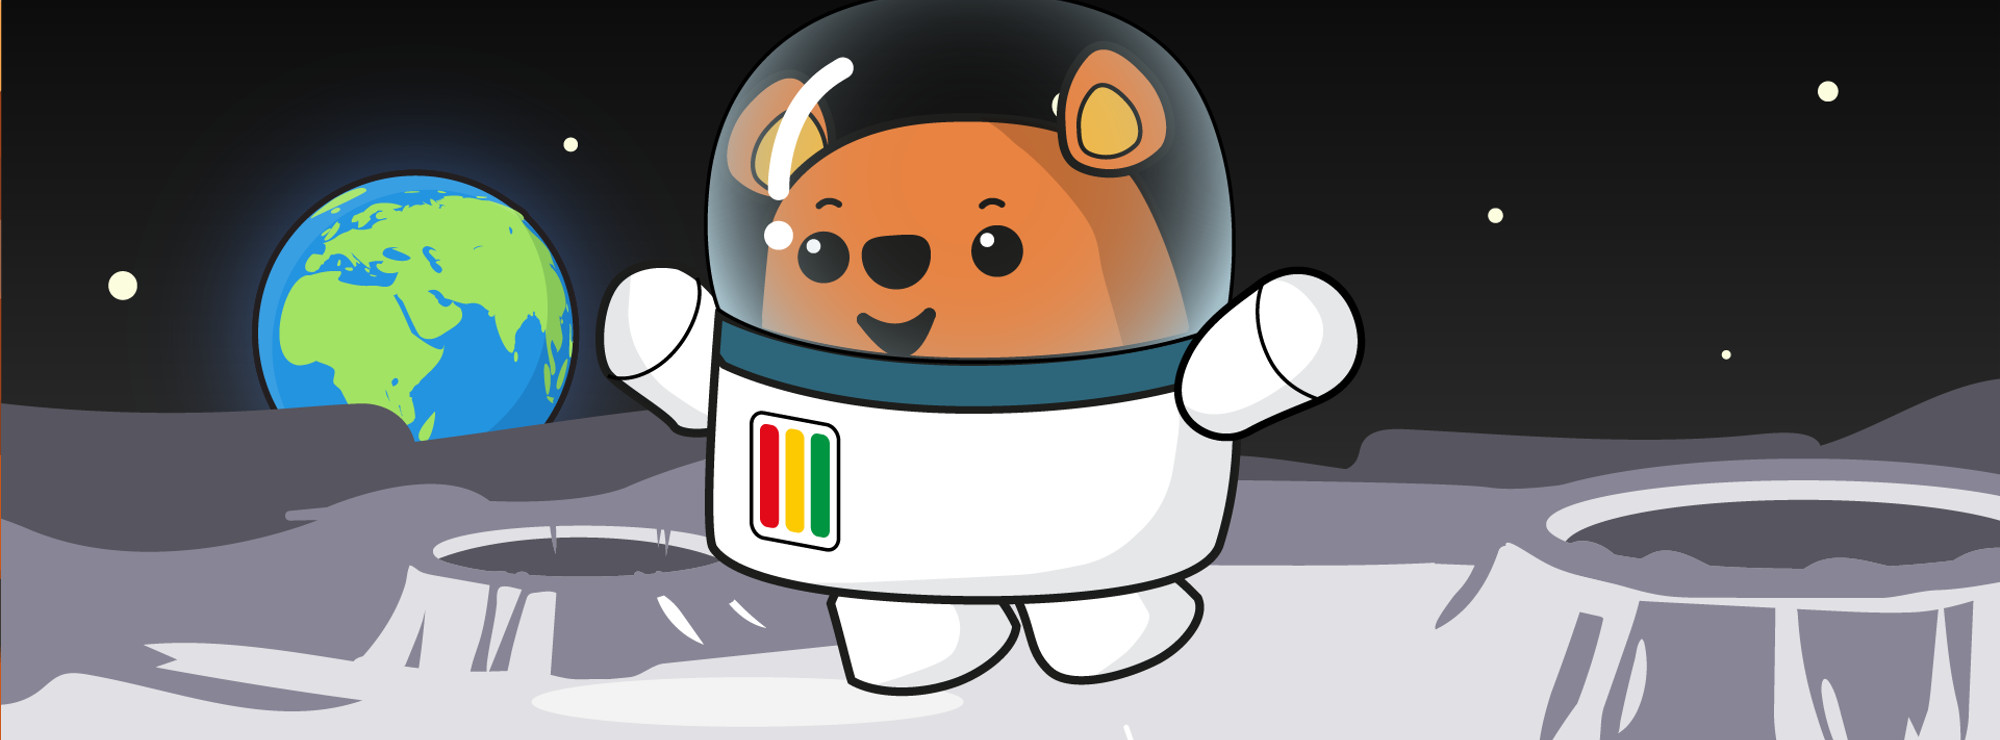 Ted's space adventure